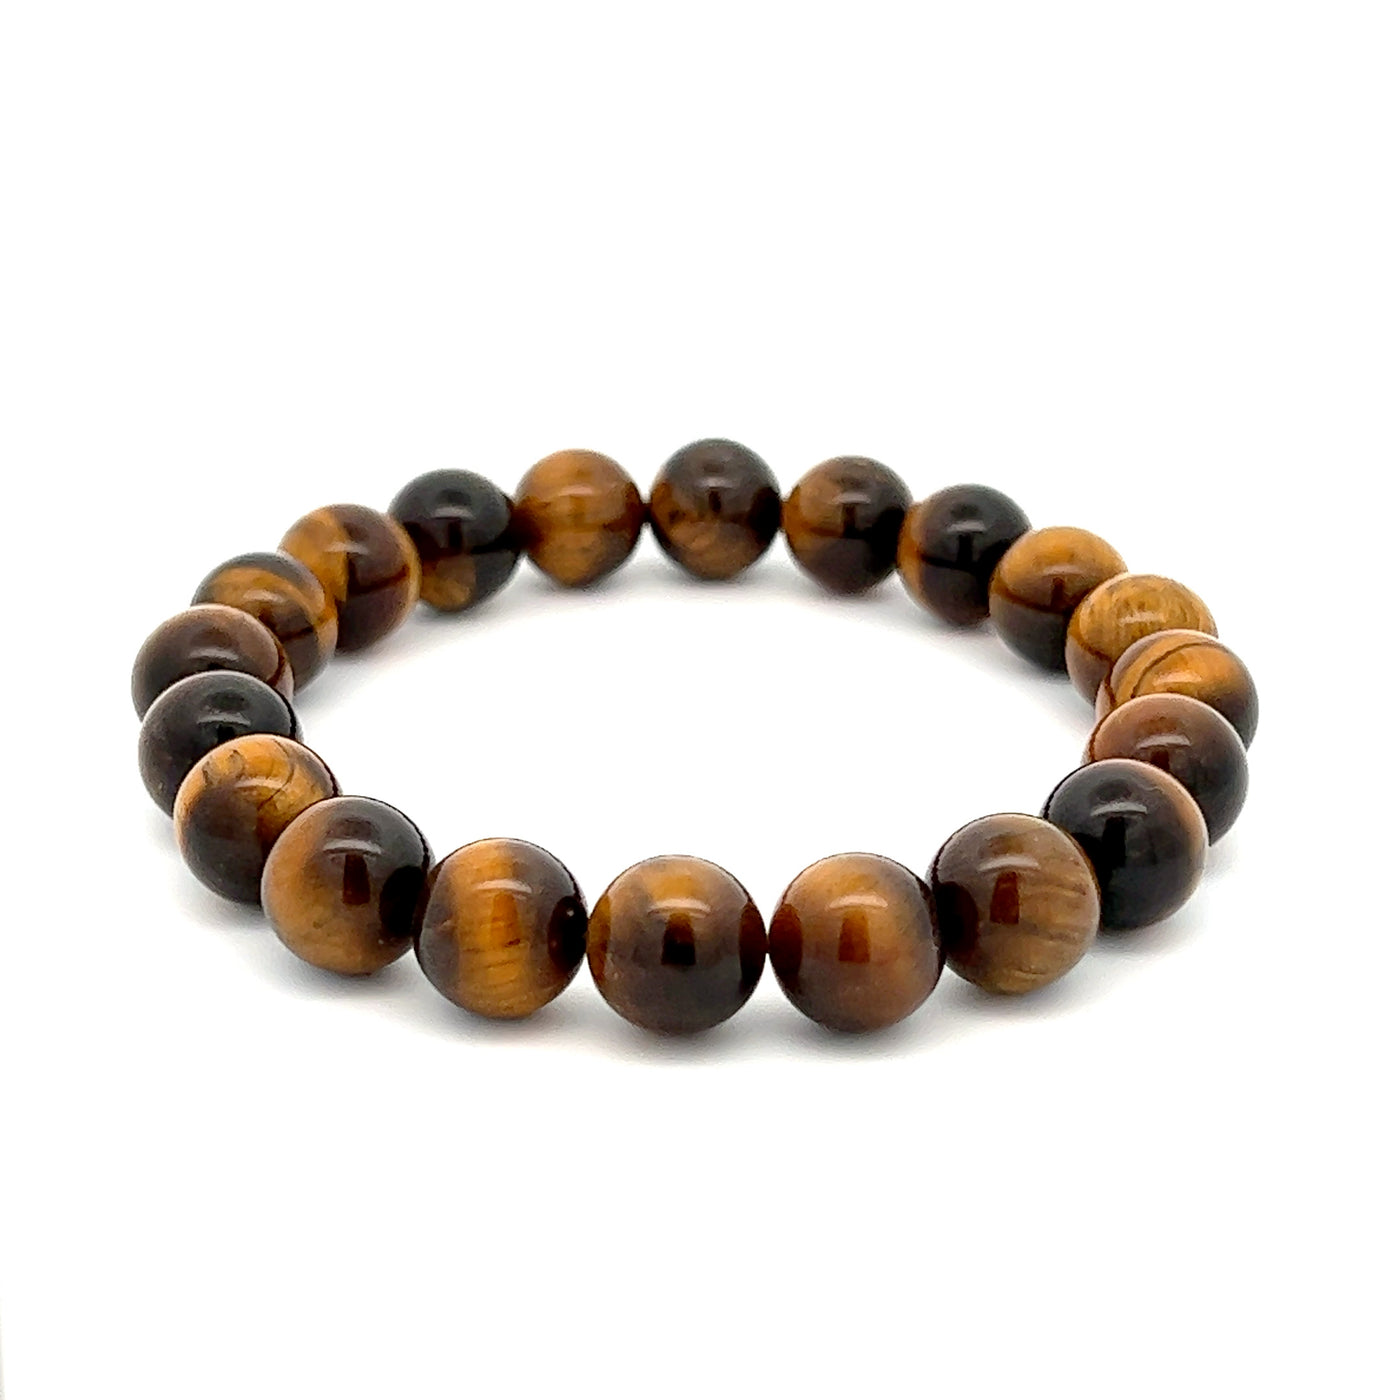 Tiger's Eye Stretchy Bracelet, Handcrafted in Canada